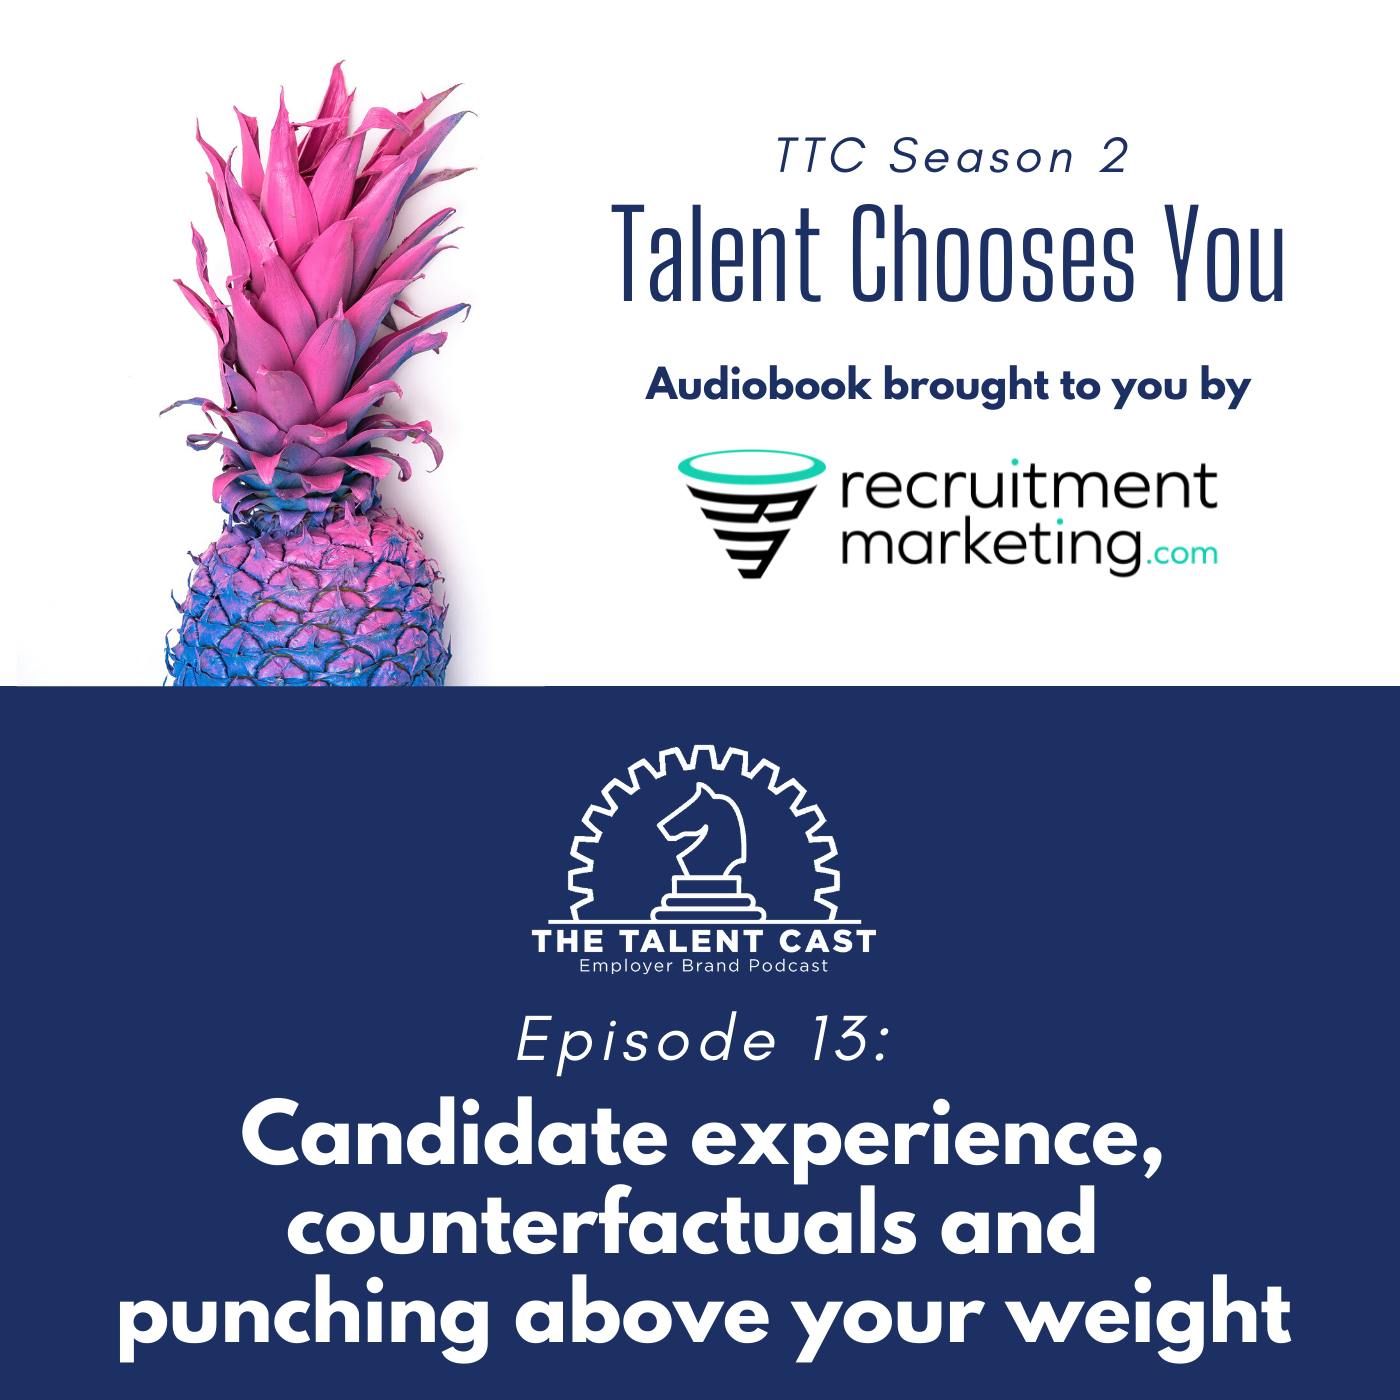 Candidate experience, counterfactuals and punching above your weight